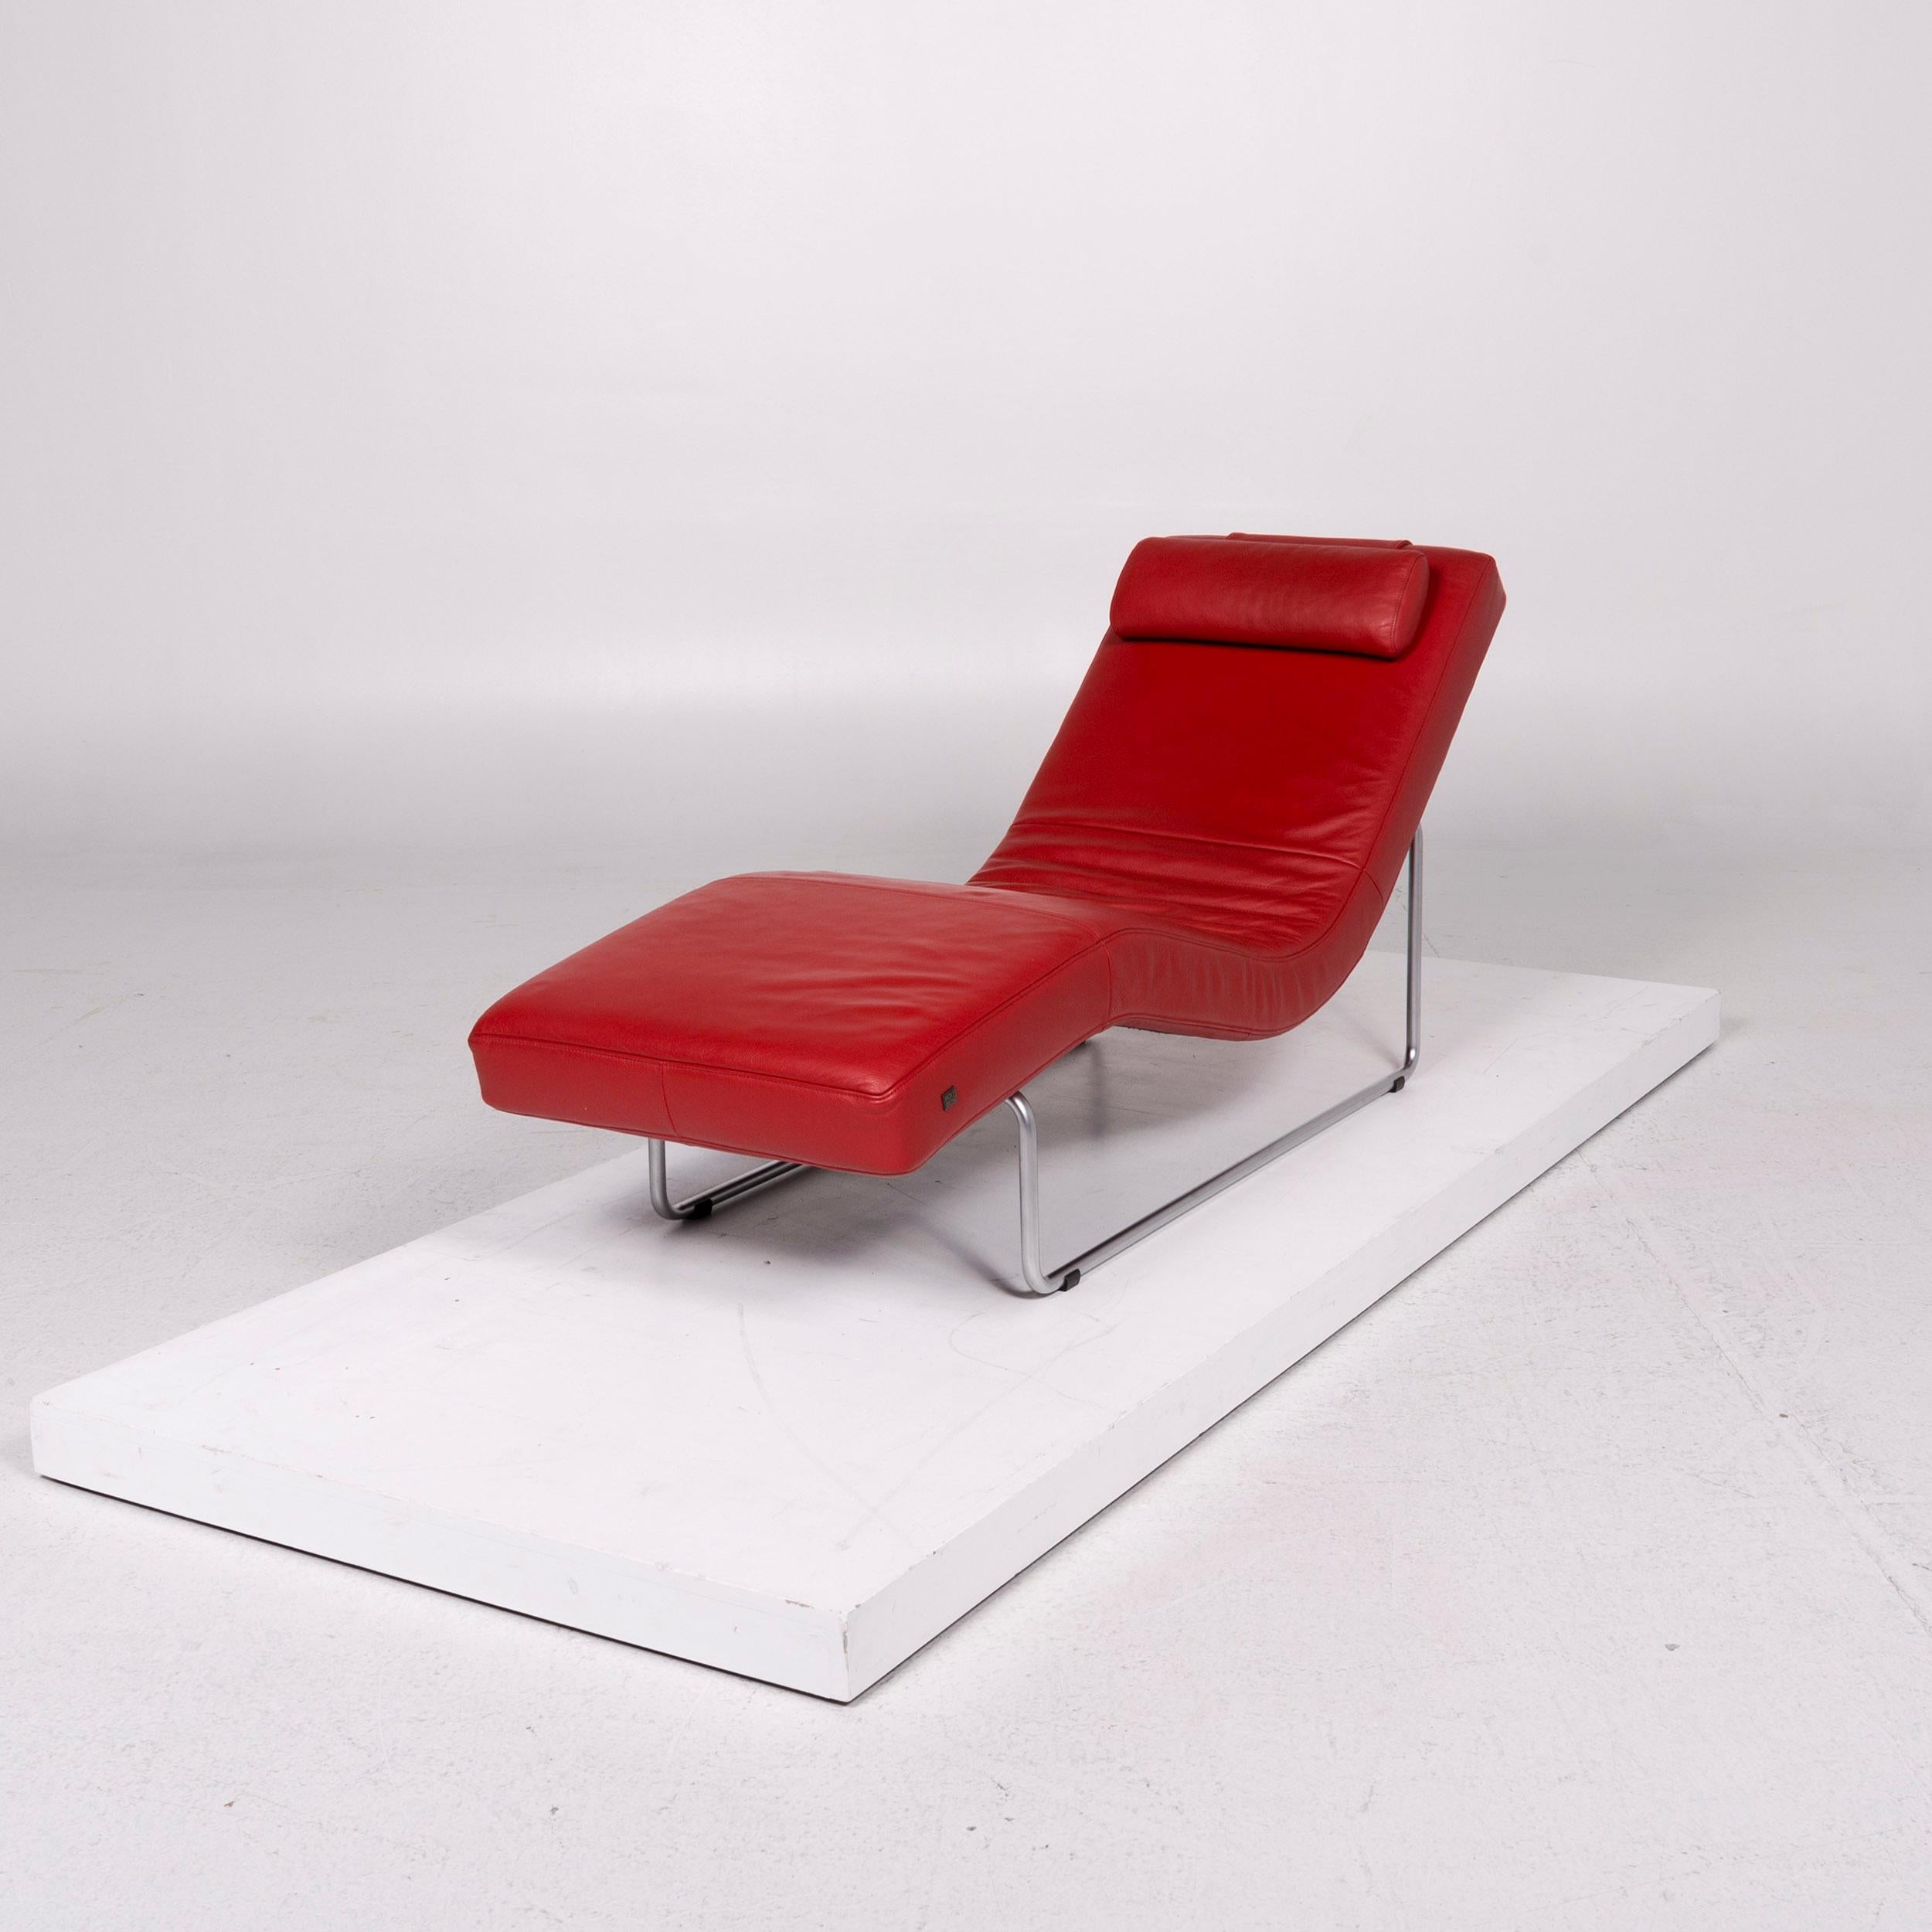 We bring to you a Rolf Benz leather lounger red relax function function.

 Product measurements in centimeters:
 

 Depth 170
Width 60
Height 62
Seat-height 39
Seat-depth 104
Seat-width 60
Back-height 40.


  